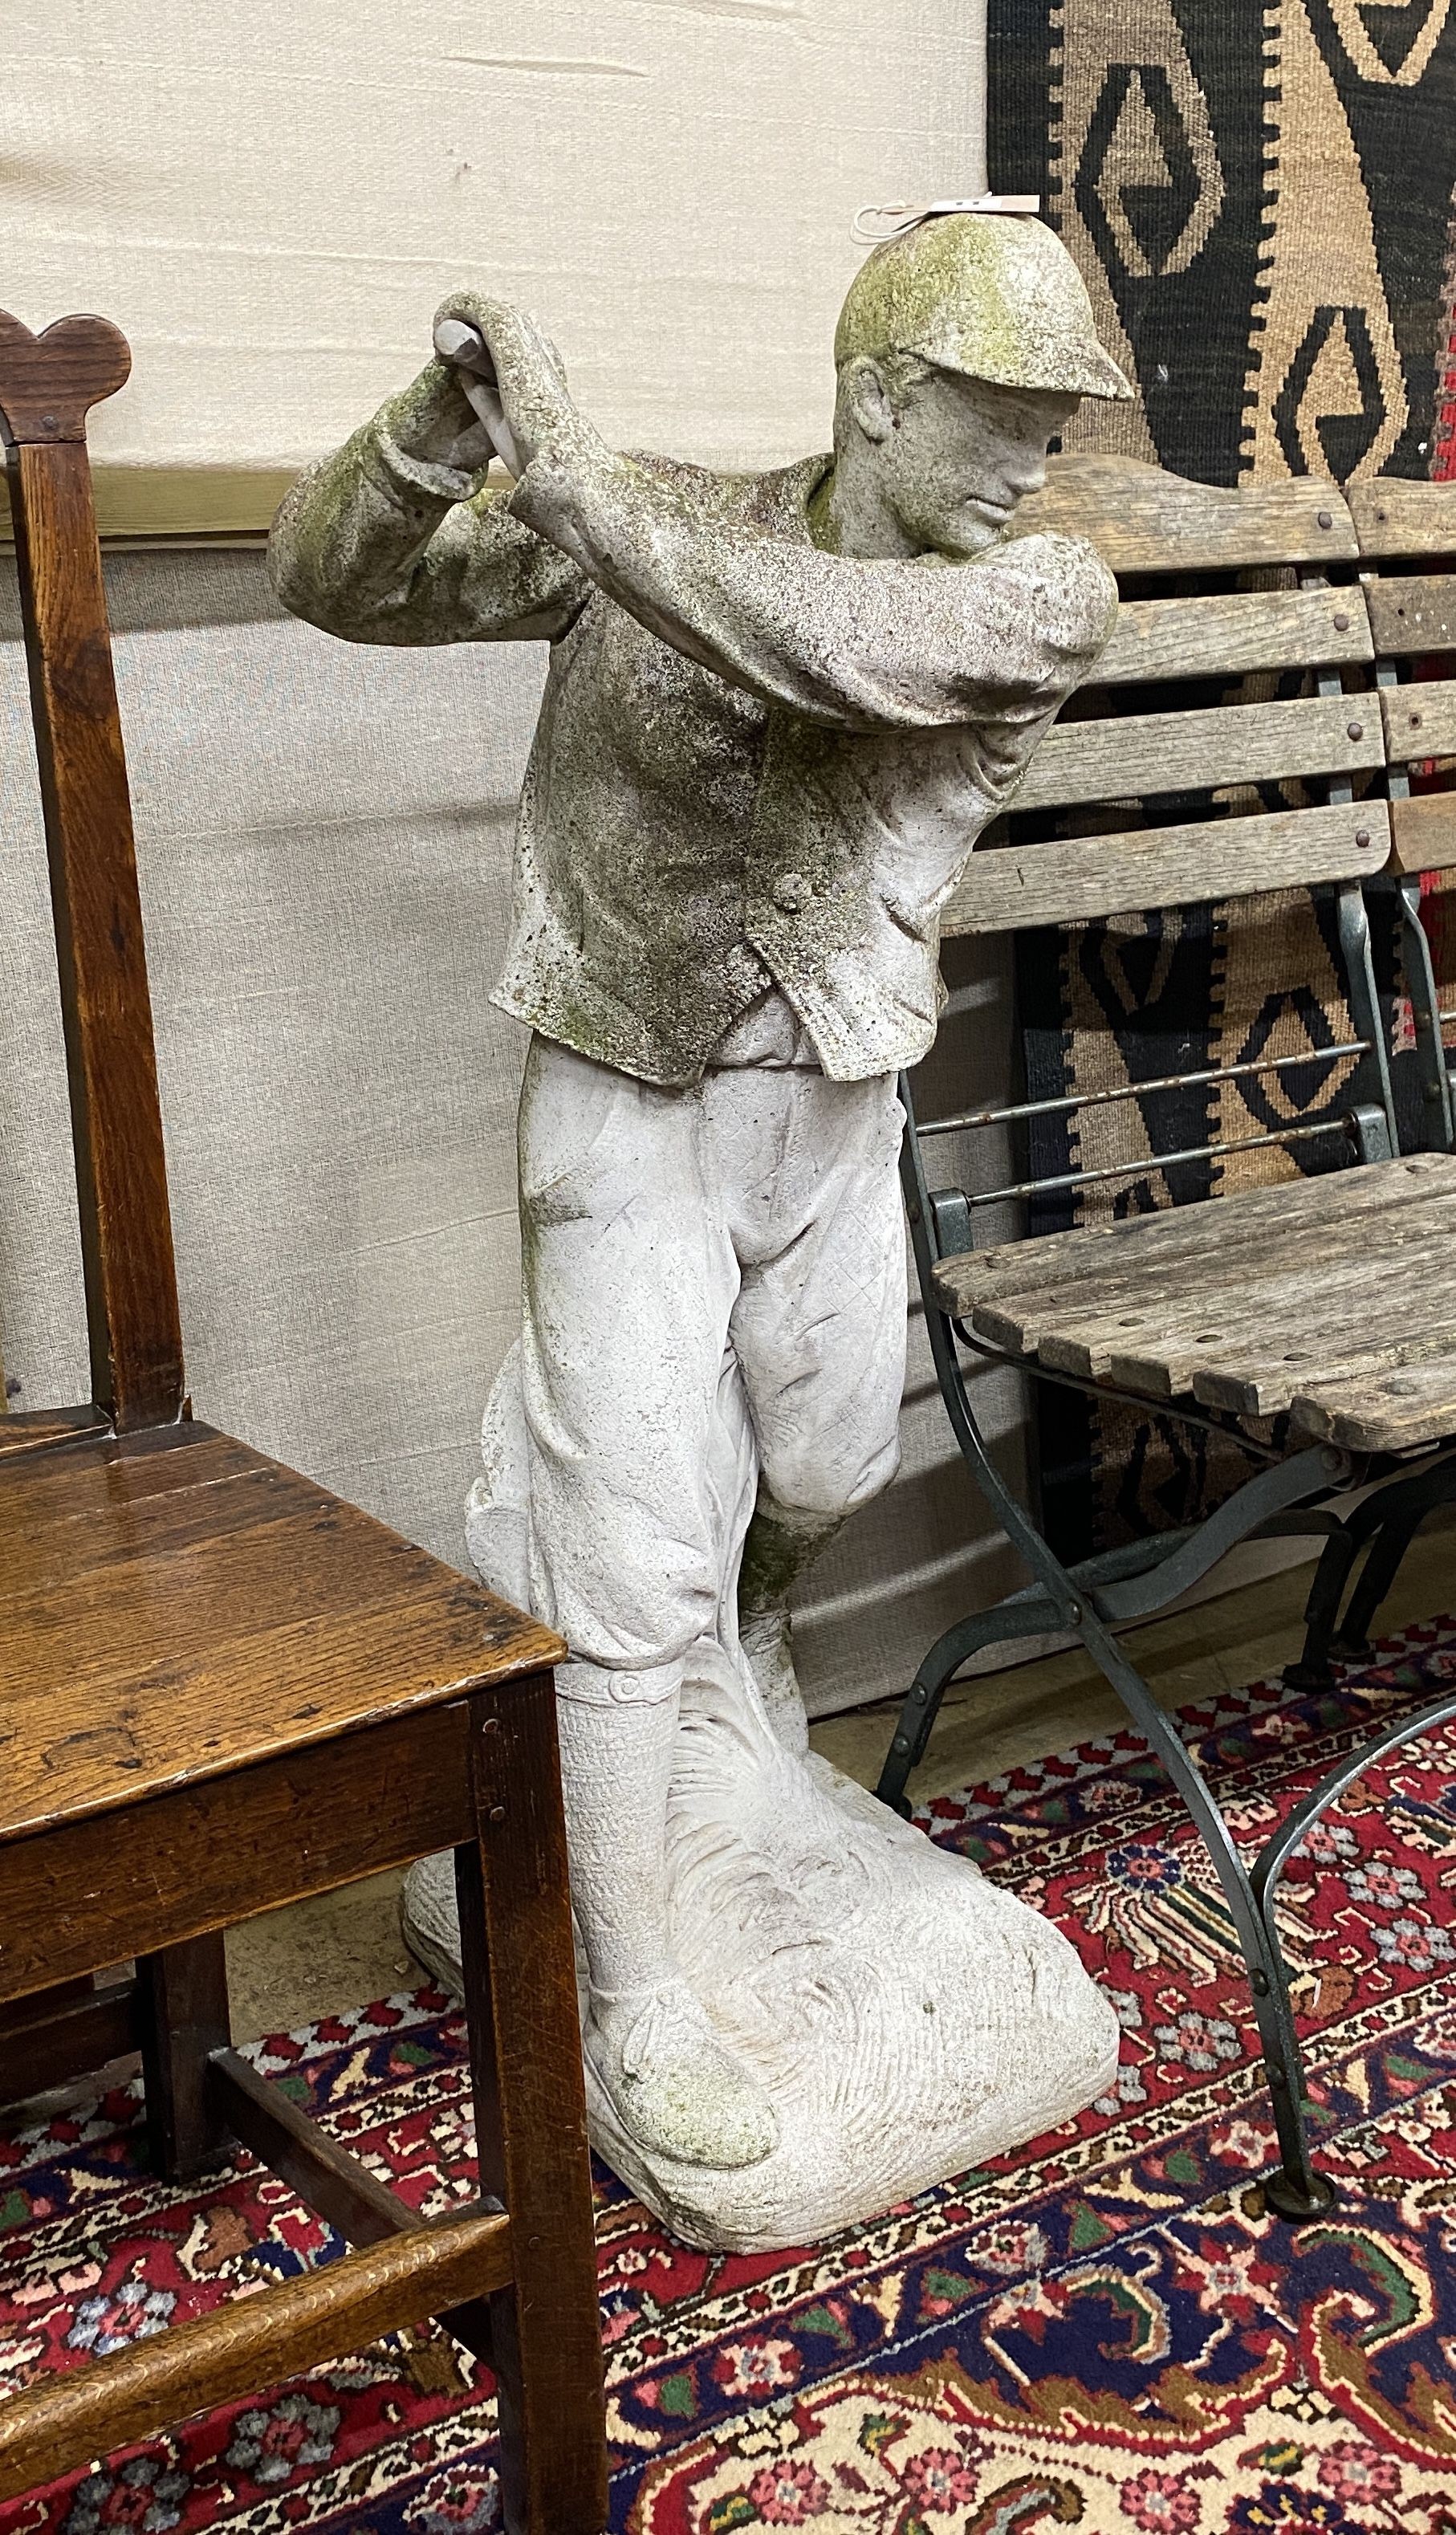 A reconstituted stone garden ornament modelled as a golfer, height 102cm